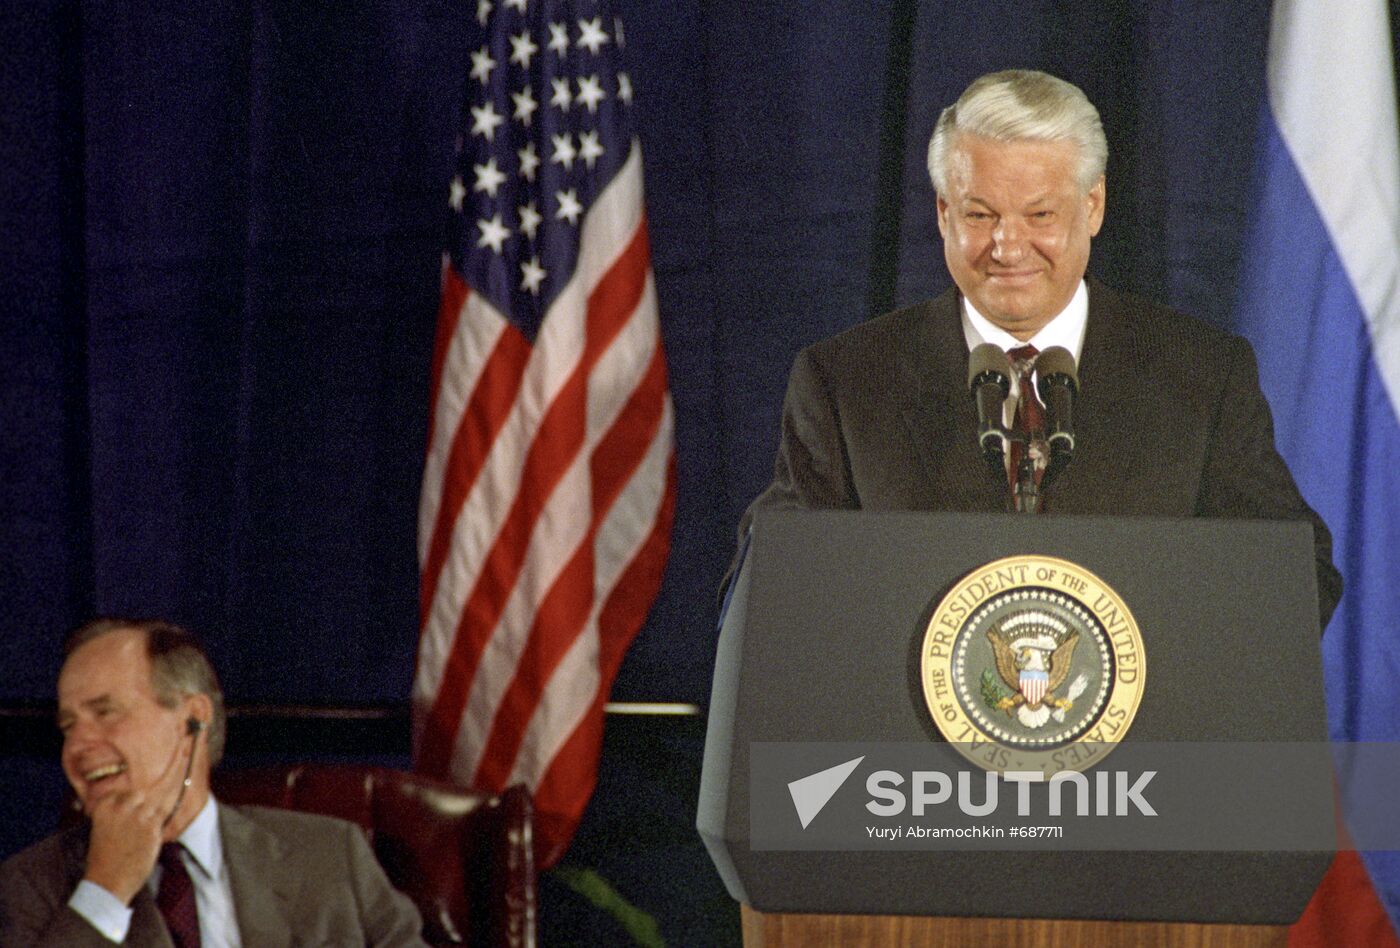 State visit of Russian President Boris Yeltsin to the USA